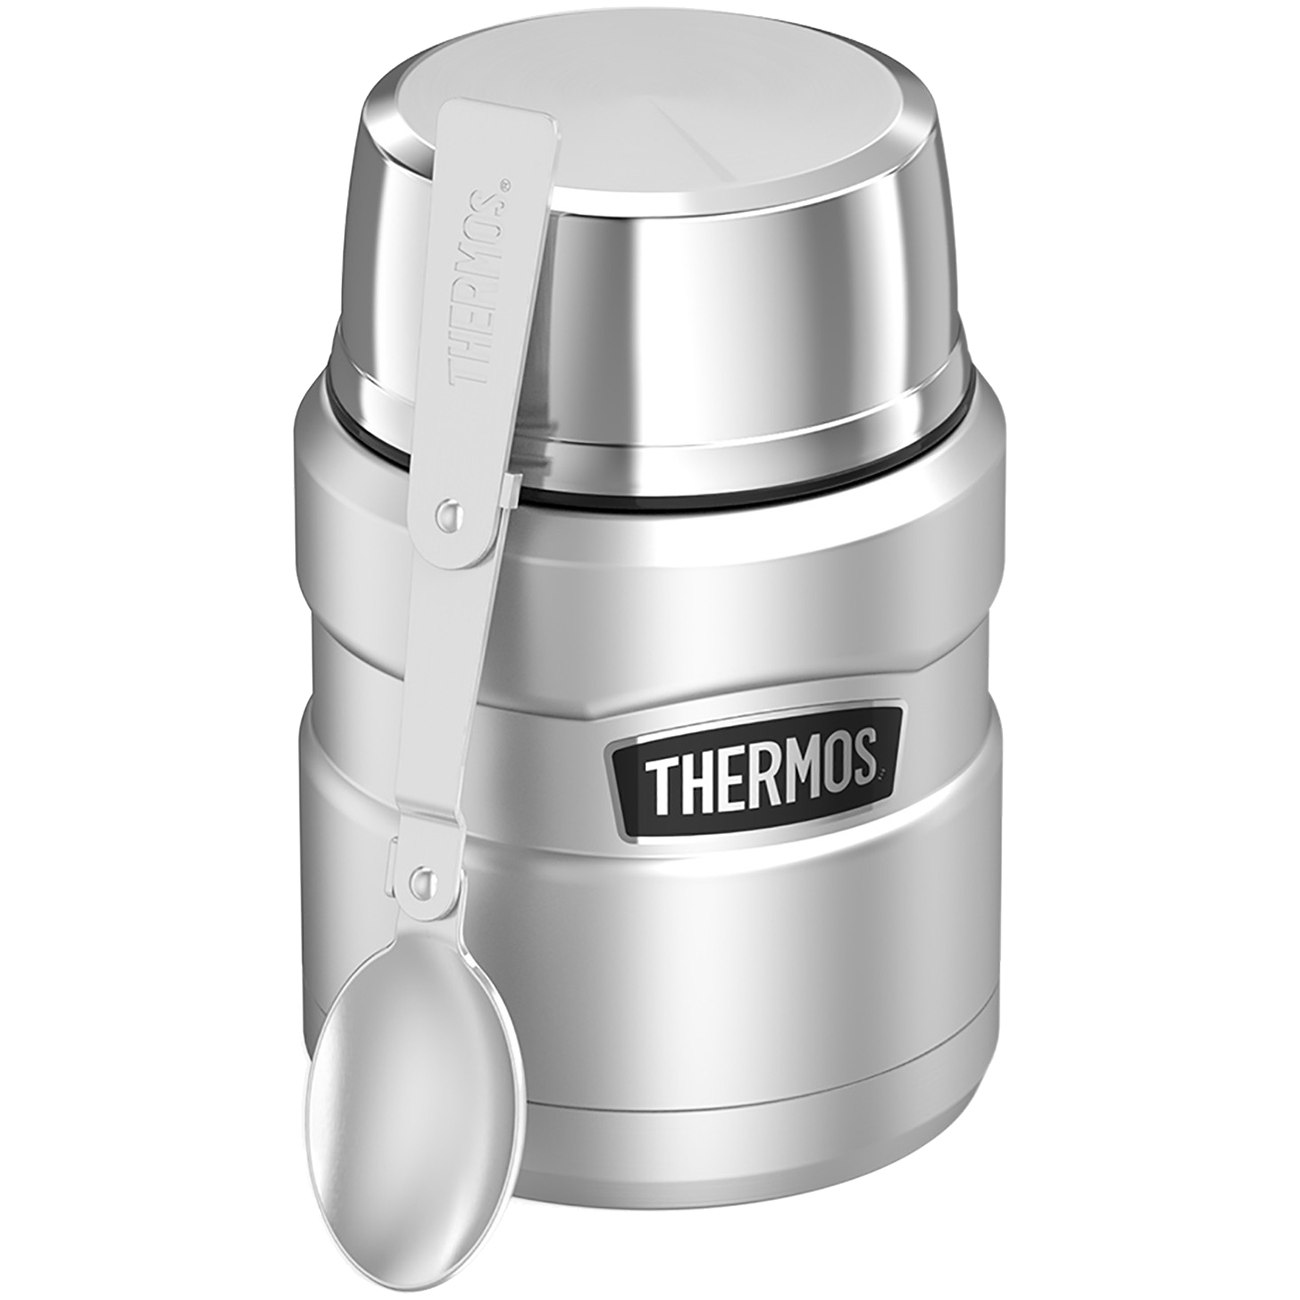 Productfoto van THERMOS® Stainless King Insulated Food Jar 0.47L - stainless steel matt